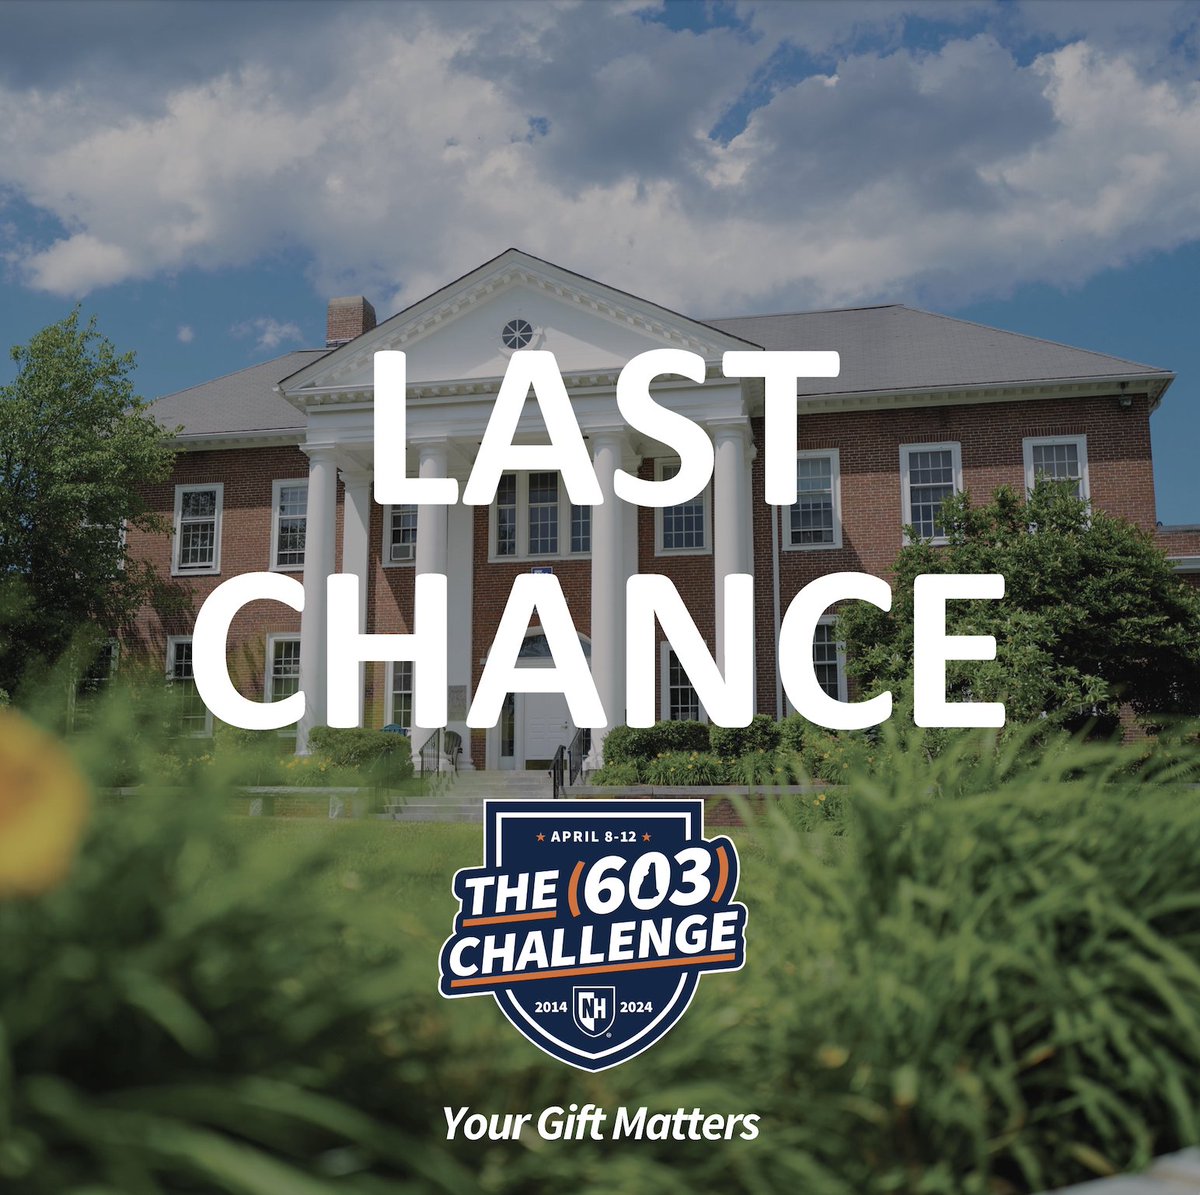 Just a few more hours left in #UNH603 and we are so close to reaching our goal! We need your support to finish off the (603) Challenge strong! Donate to the law school before 11:59pm tonight. Together let's make a difference in legal education. Donate: givecampus.com/schools/Univer…